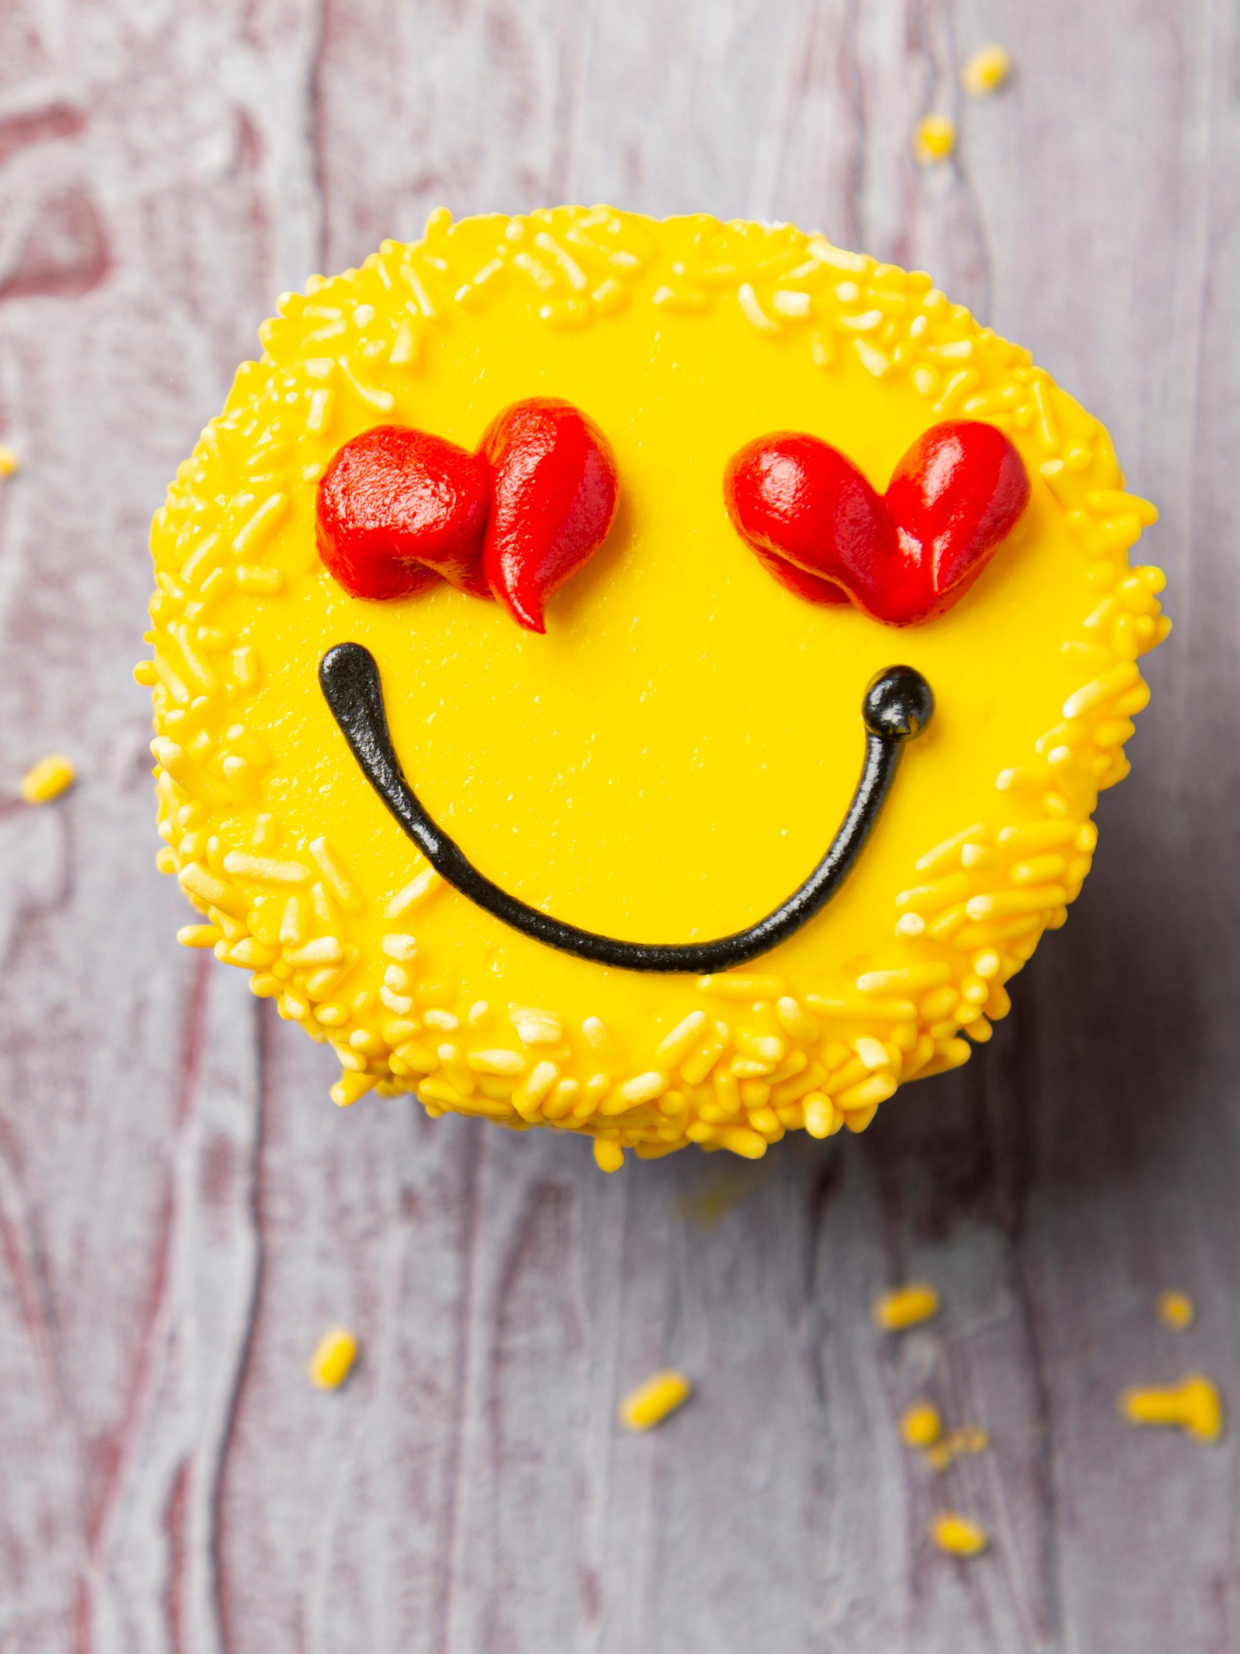 Yellow smile cupcake with red heart eyes depicting Nutrition Counseling